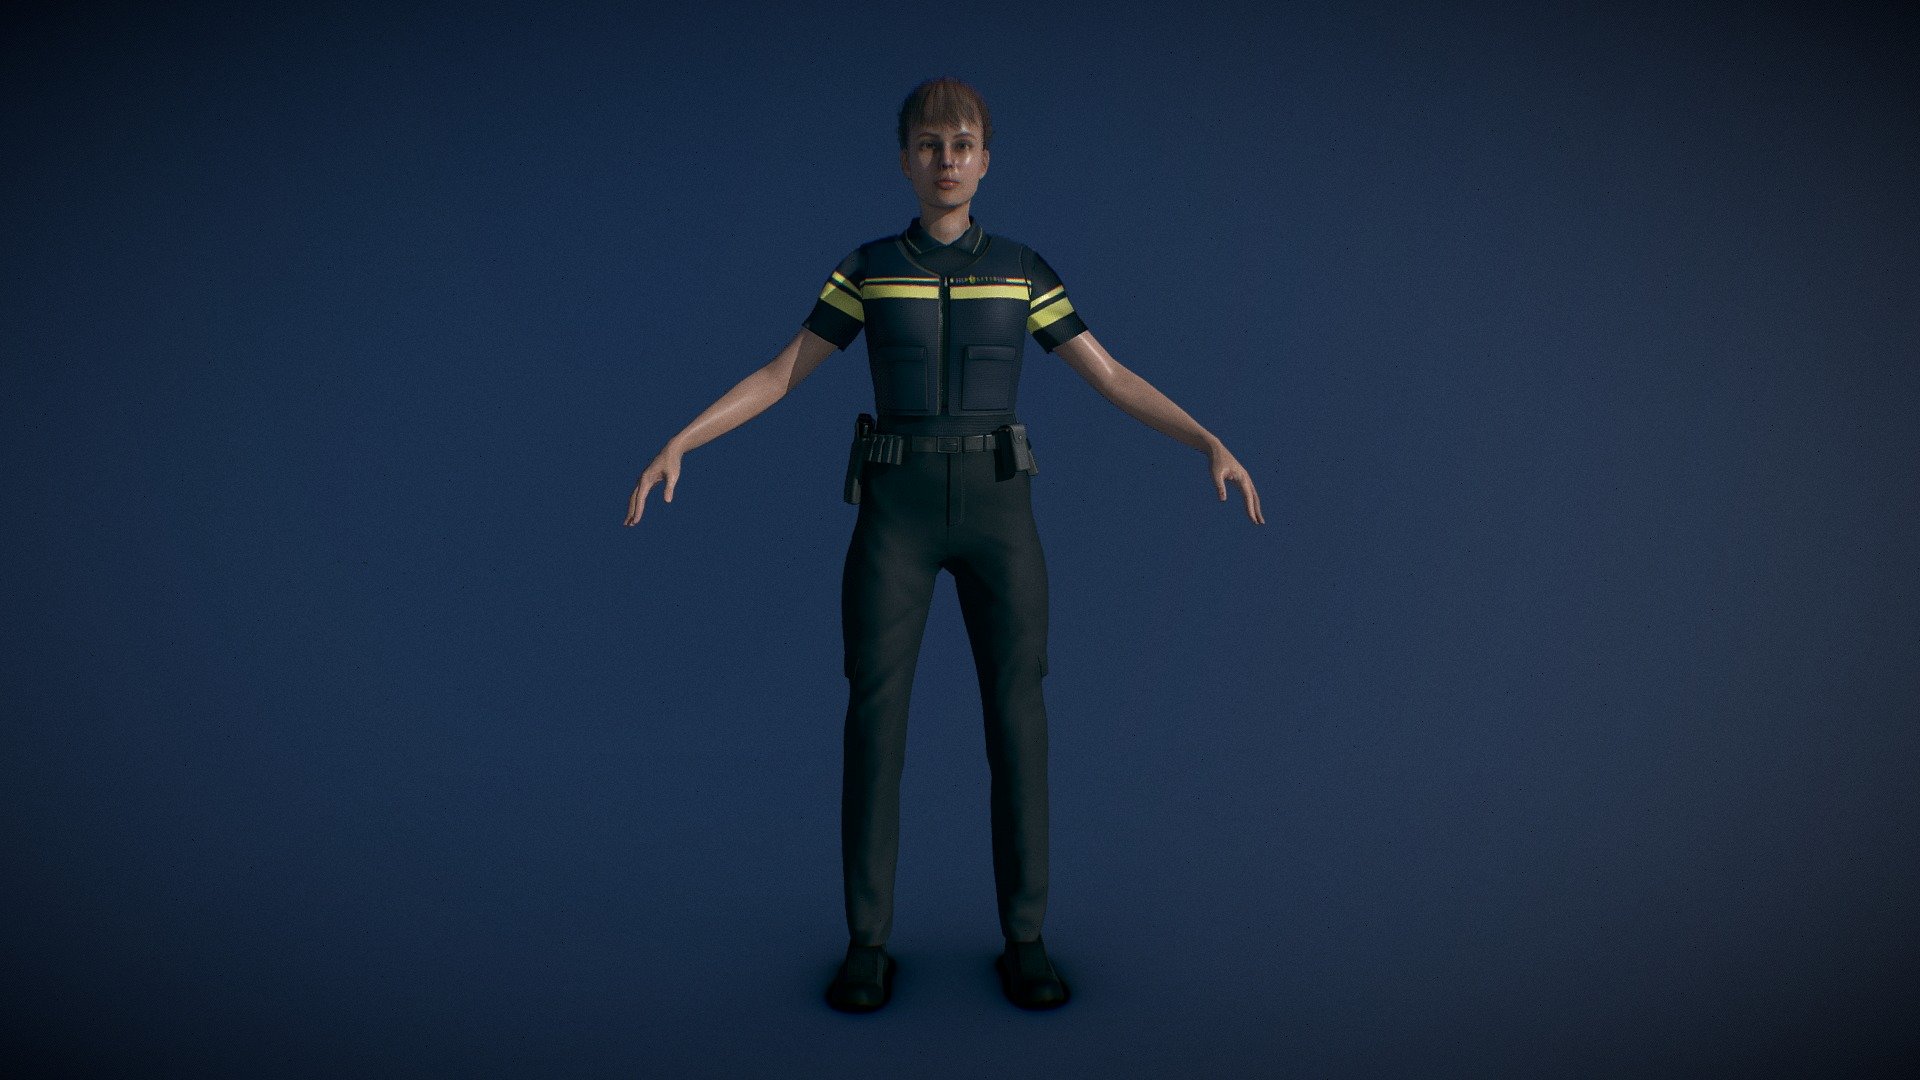 For a custom dutch police VR simulation project, we made a custom dutch police female officer model with realistic details and rigged. 

The related VR project is as experimental to learn diffirent scenario's as a police officer and how it is like being in a world where everything can happen just as in real life. This model and project affiliated content will not be downloadable or available to the public it was rigged so it fits the Unreal Engine 4 mannequin.

This project is not affiliated to the original author AKA Politie Nederland and its subsidaries 3d model